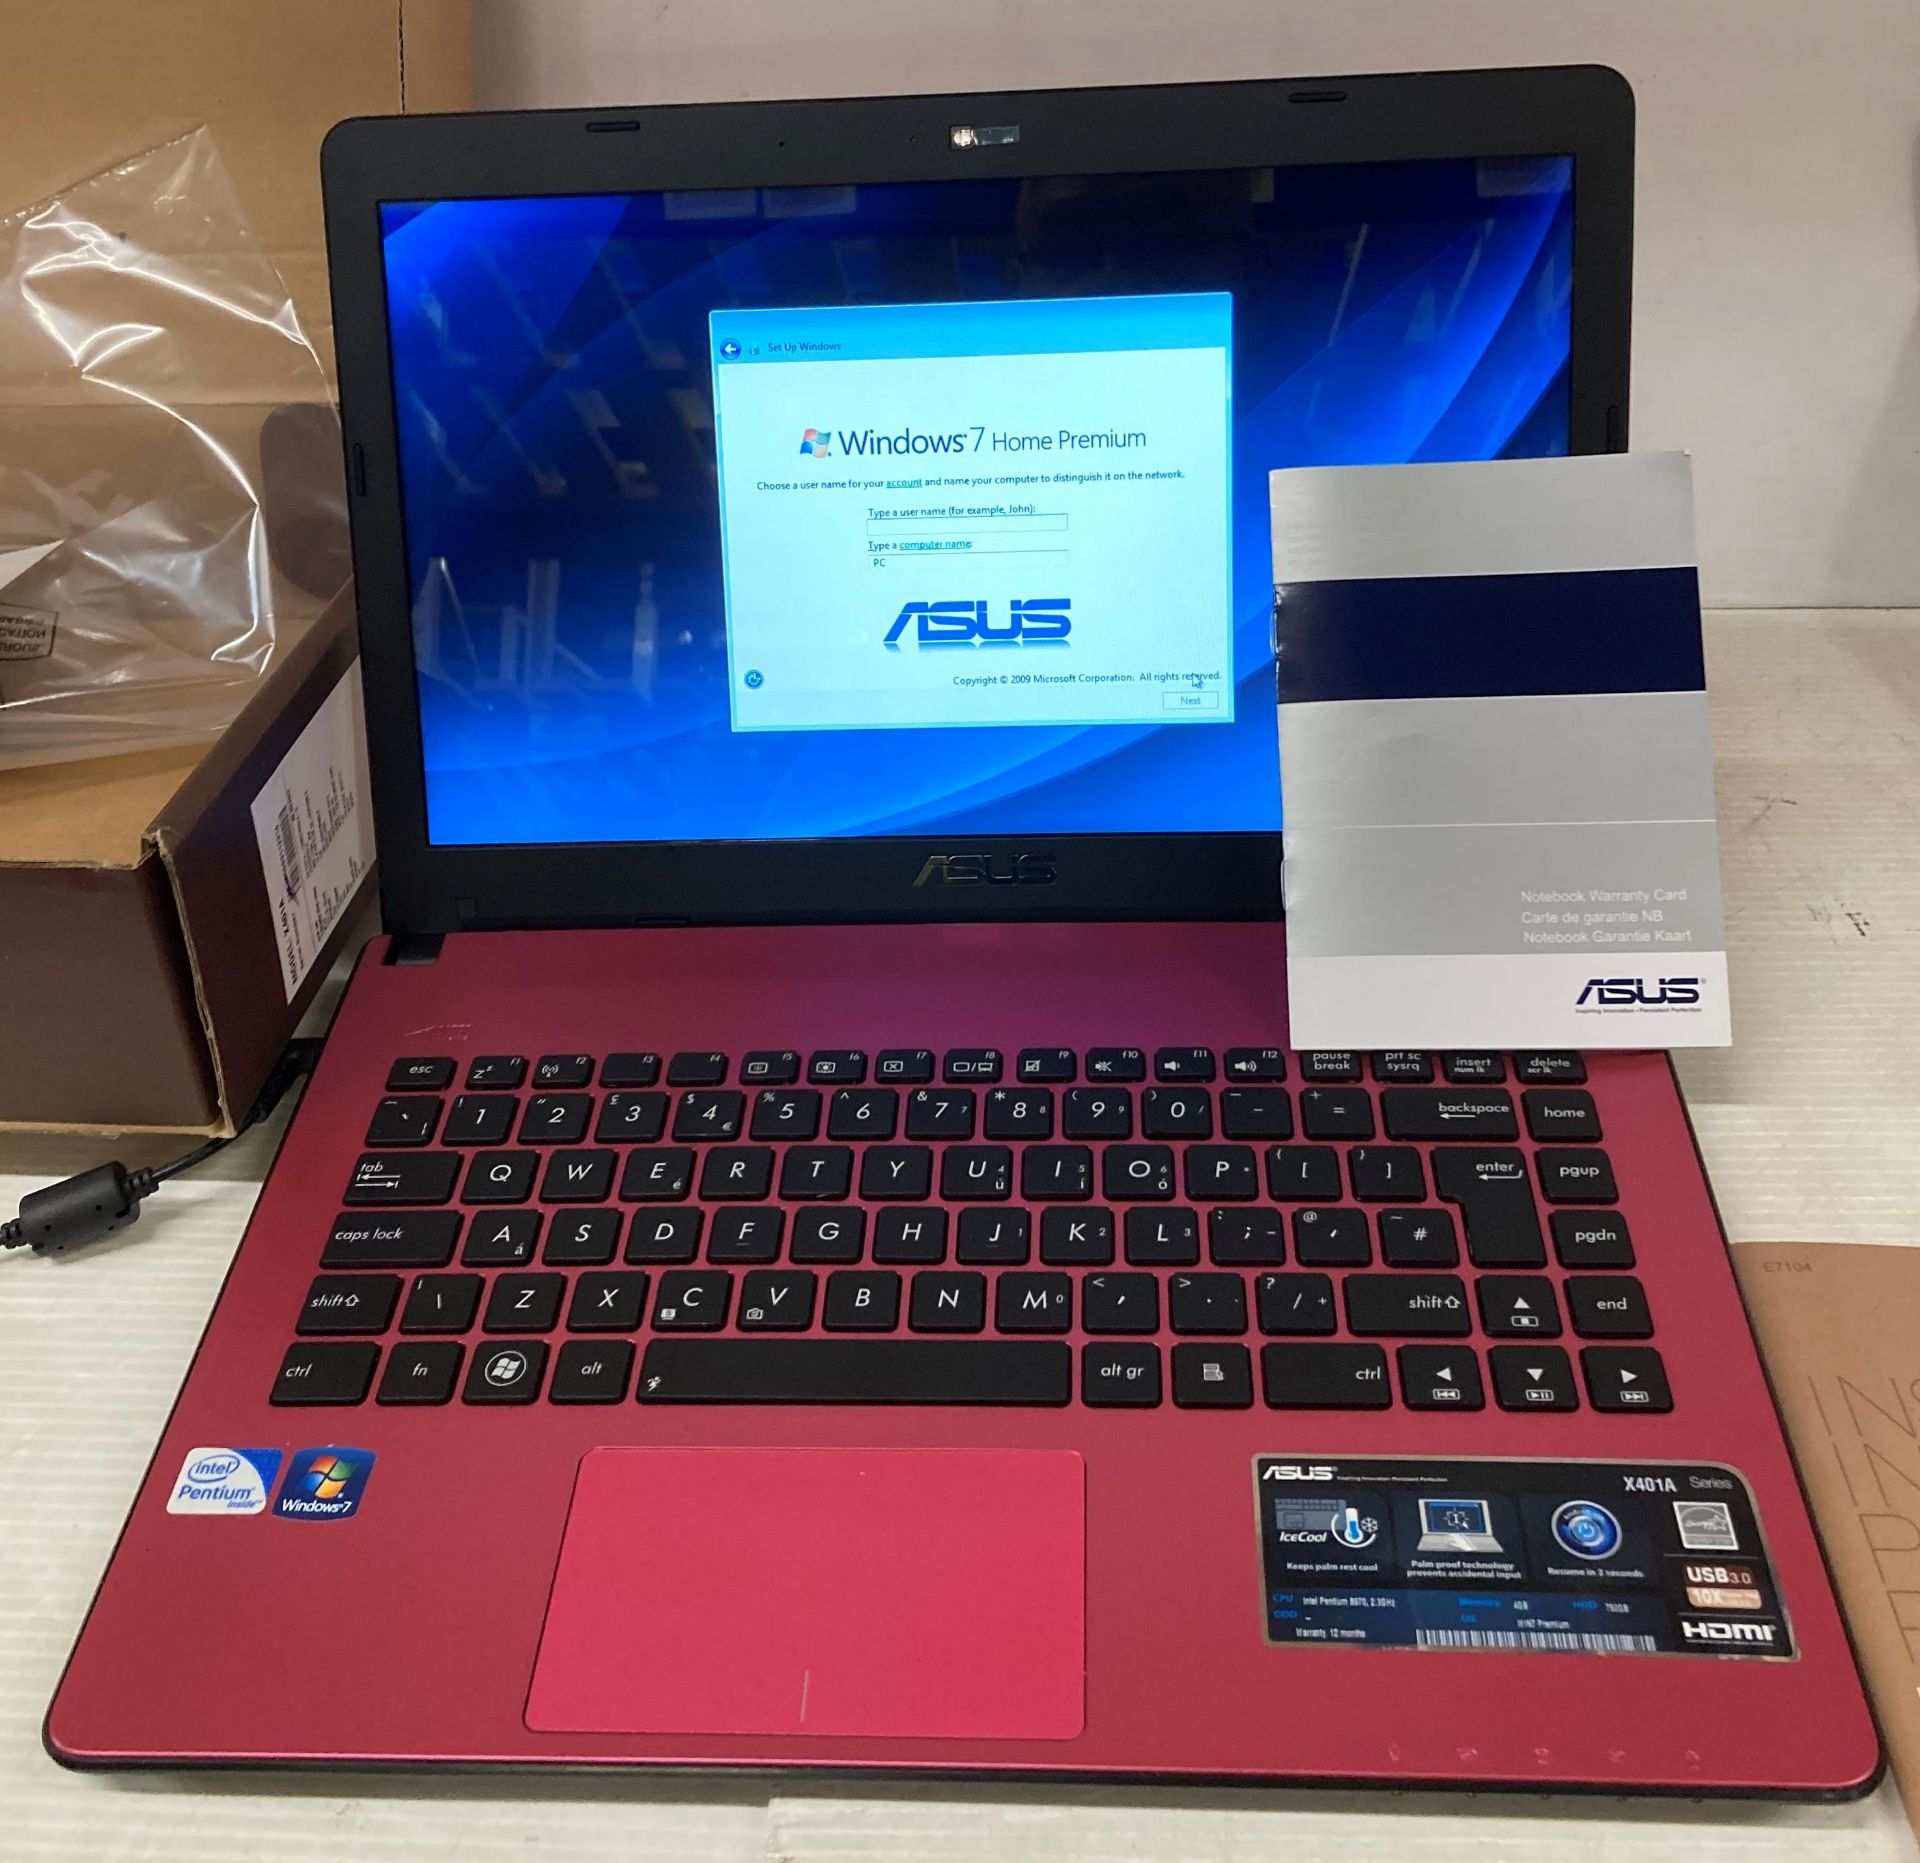 Asus Notebook complete with power lead and user manuals (appears new and boxed) (K10)